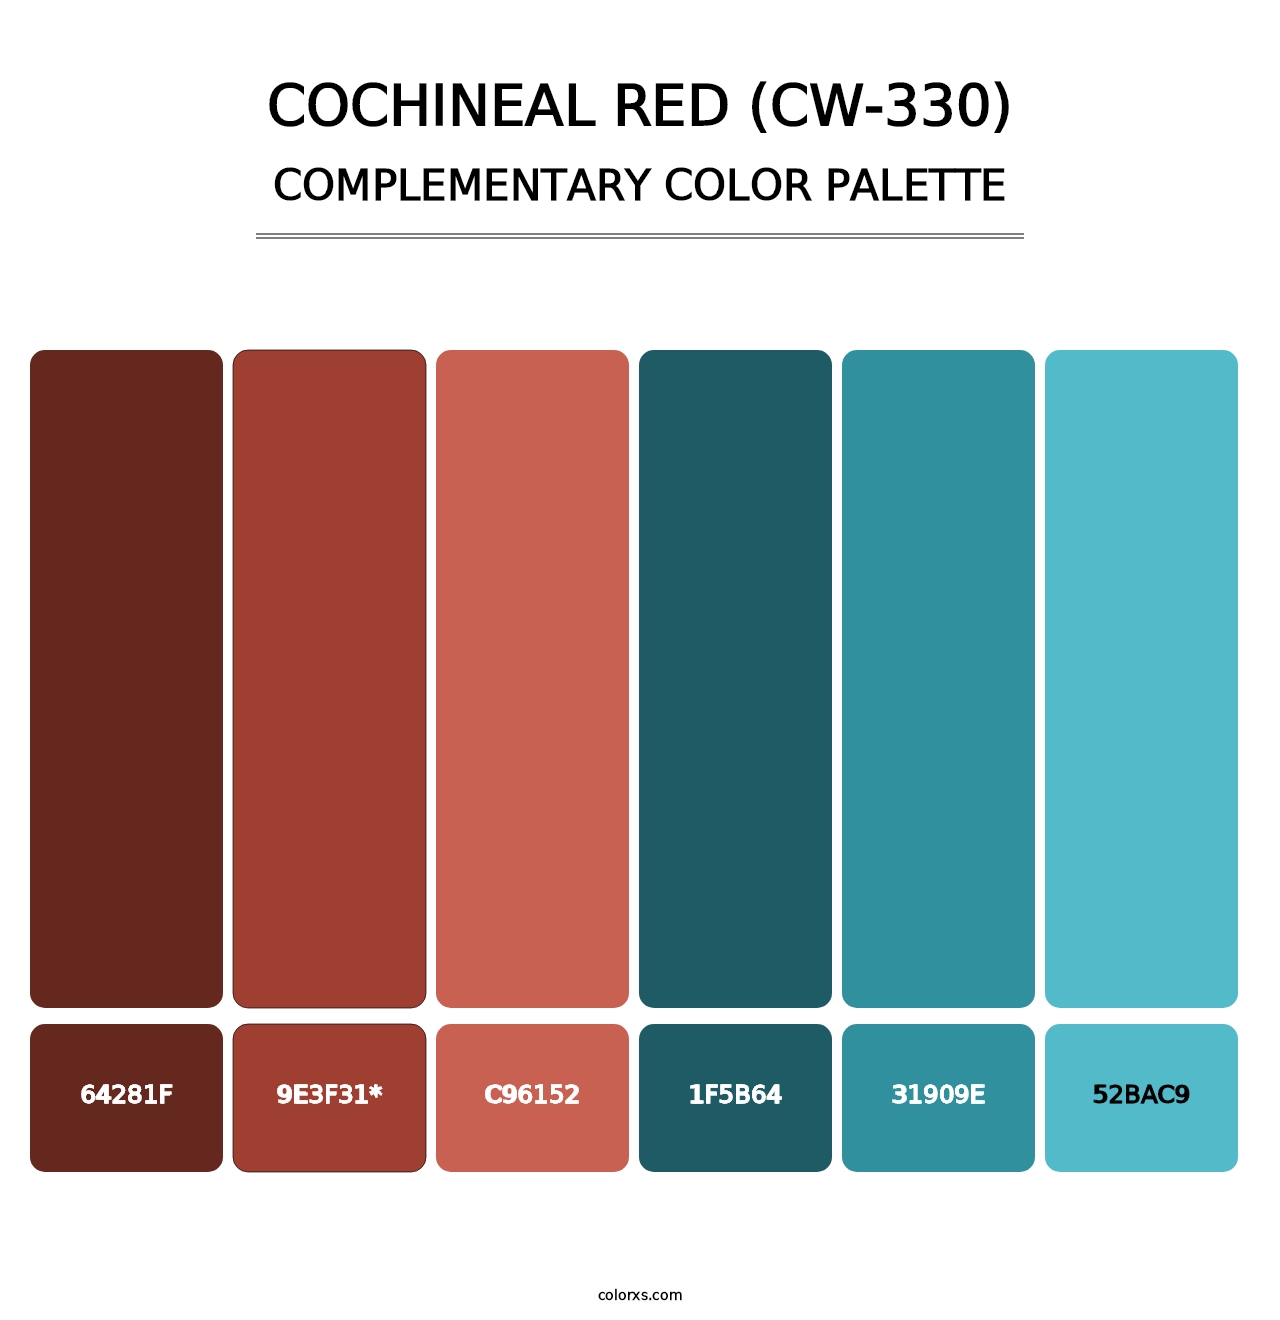 Cochineal Red (CW-330) - Complementary Color Palette